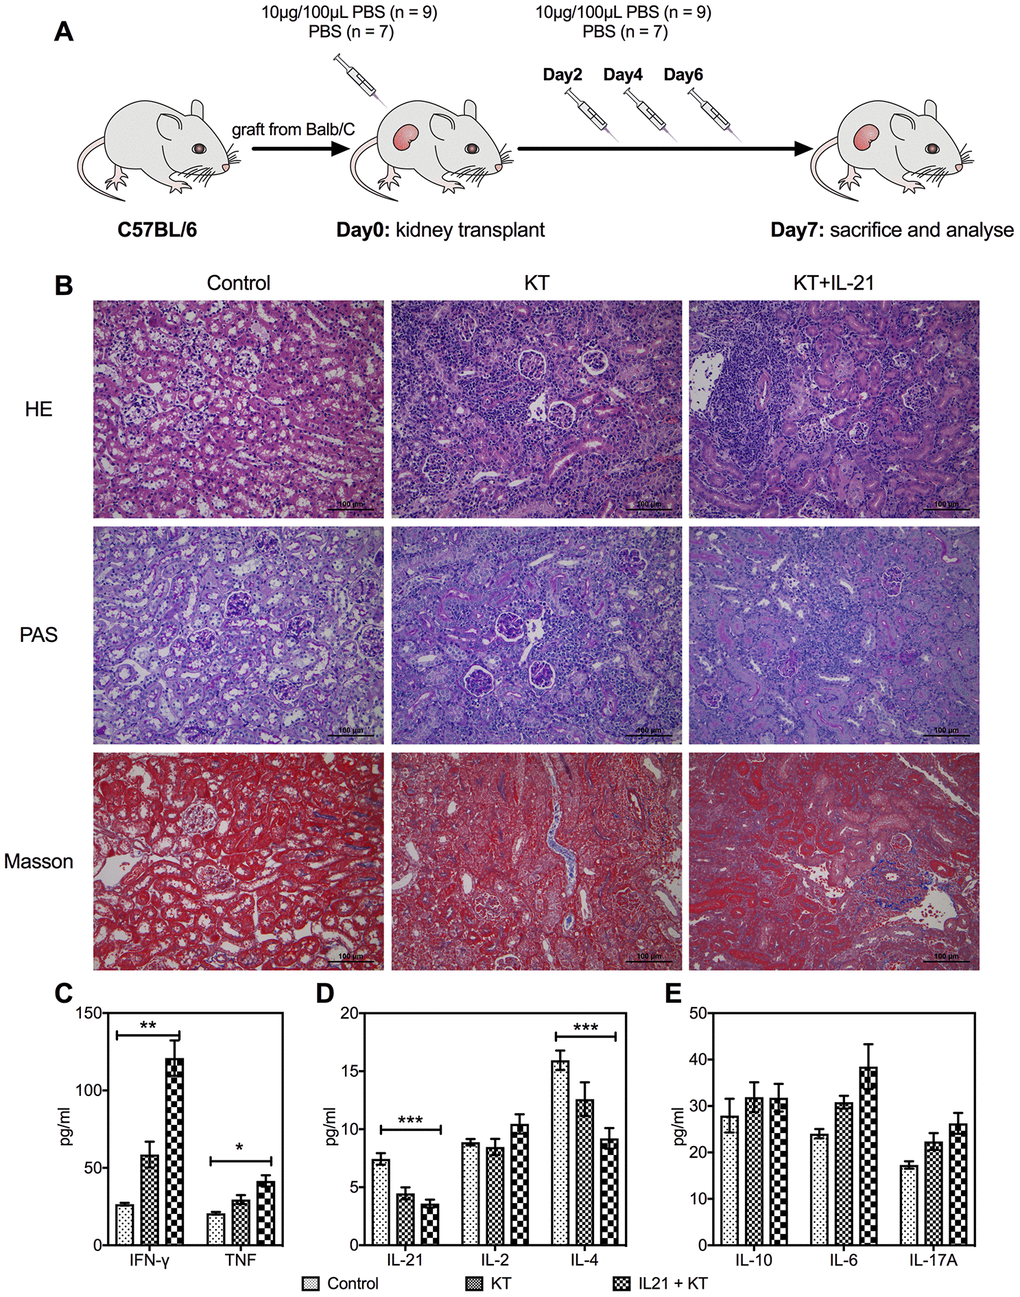 Exogenous IL-21 promotes inflammatory infiltration in the allograft. C57BL/6 mice received renal allografts from Balb/c mice. Kidney recipients were injected recombinant murine IL-21 (10 μg in 100 μL PBS; n = 9) or 100 μL PBS (n = 7) in the tail vein on days 0, 2, 4, and 6 after transplantation (A). Blank control (n = 3) of mice without transplantation received tail vein injection of PBS simultaneously. All animals were sacrificed 7 days post-transplantation. Histologic evaluation of kidney allografts from Control, KT, and IL-21+KT recipients on day 7 post-transplantation stained with (B) H&E, PAS, and Masson’s stains (scale bar: 100μm). Levels of (C) IFN-γ and TNF, (D) IL-21, IL-2, and IL-4, (E) IL-10, IL-6, and IL-17 in the transplanted kidney of KT subgroups and primary kidney of Control are shown. Values represent mean (±SEM). *P P P 